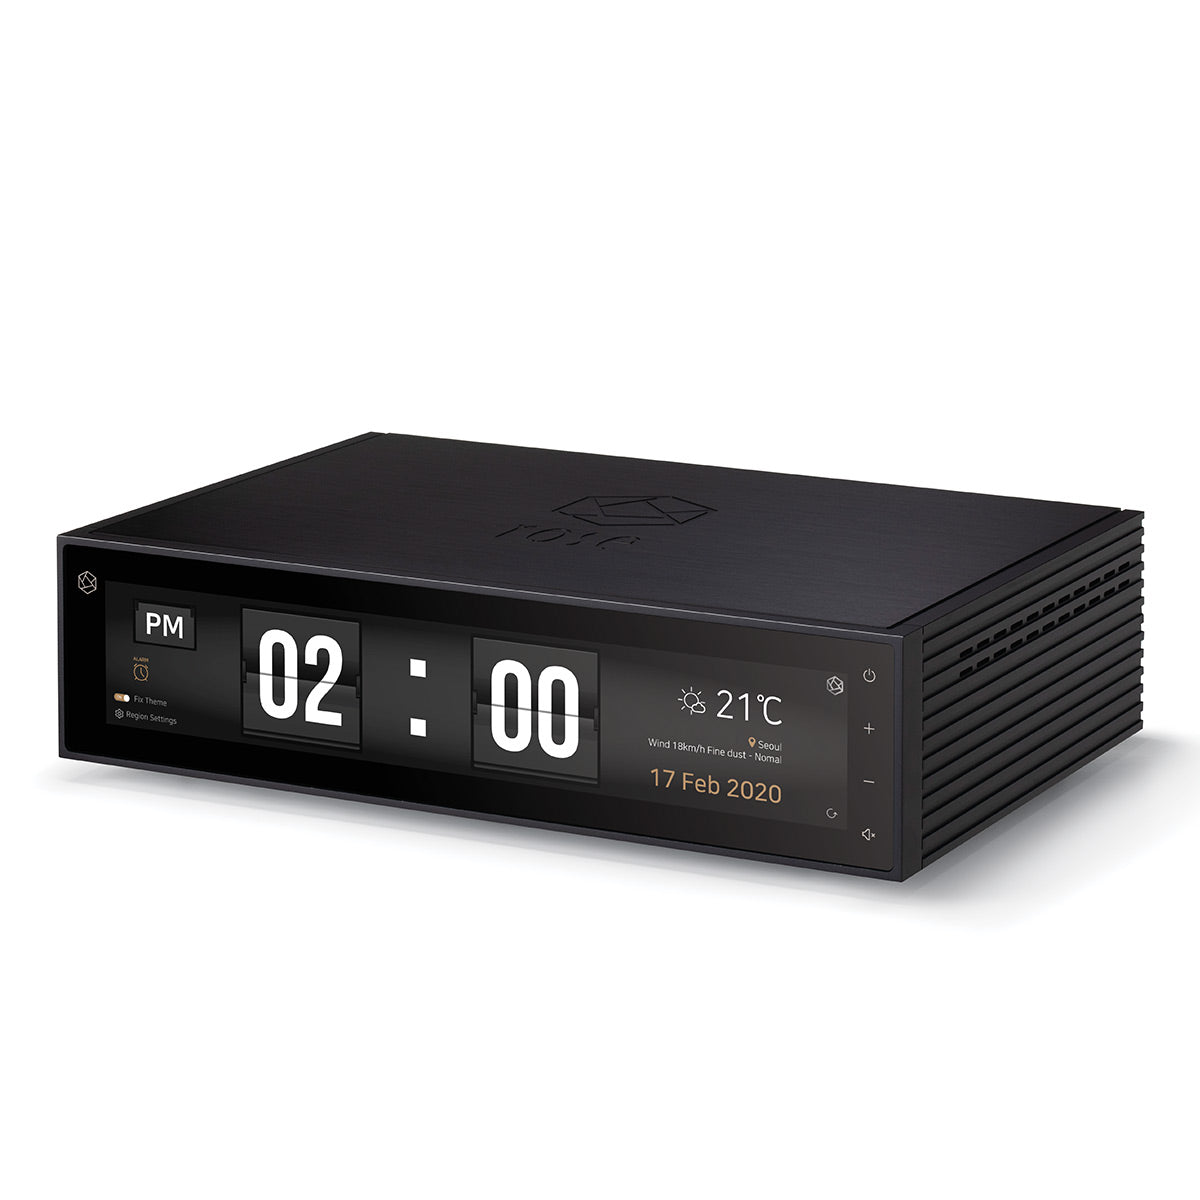 HiFi Rose RS150B High-Performance Network Streamer with Built-In ESS Sabre DAC (Black)